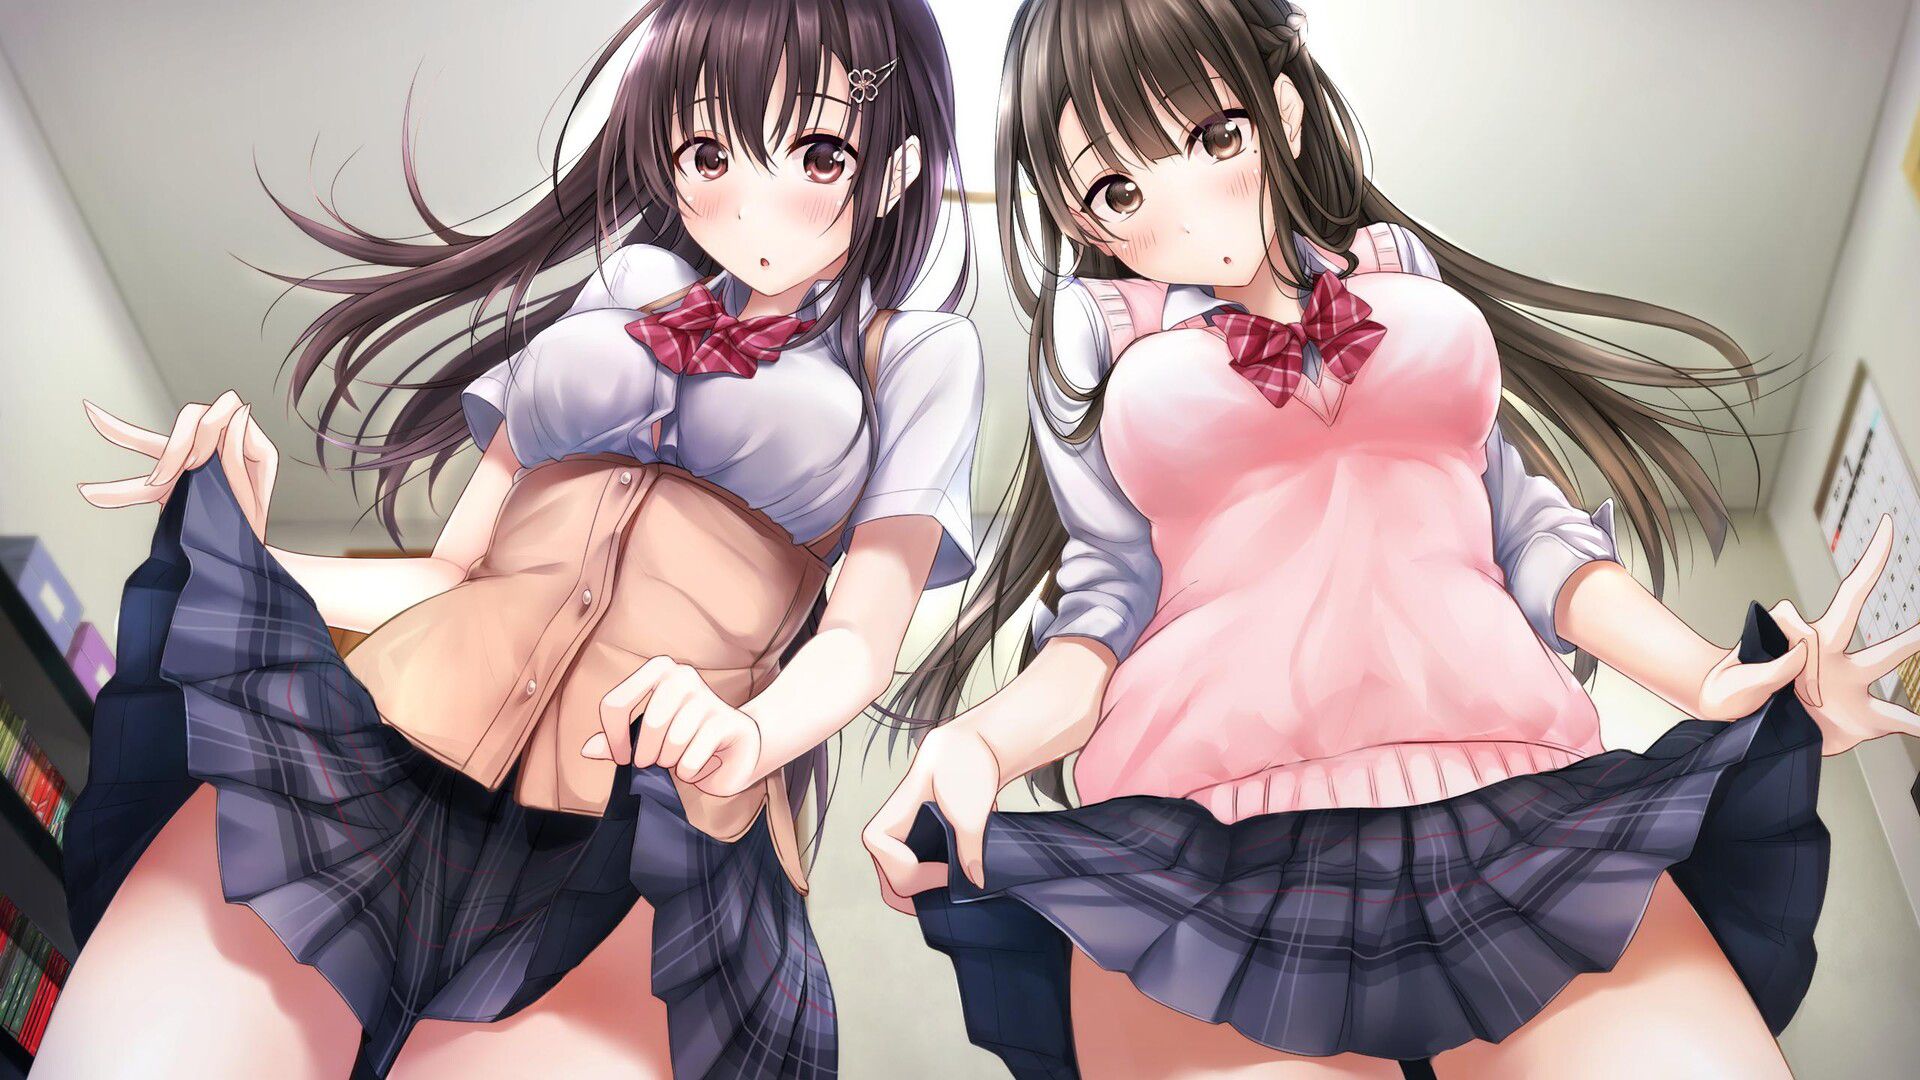 PS4 / switch version [Aikis 2] erotic event CG such as girl's skirt raise and swimsuit 4